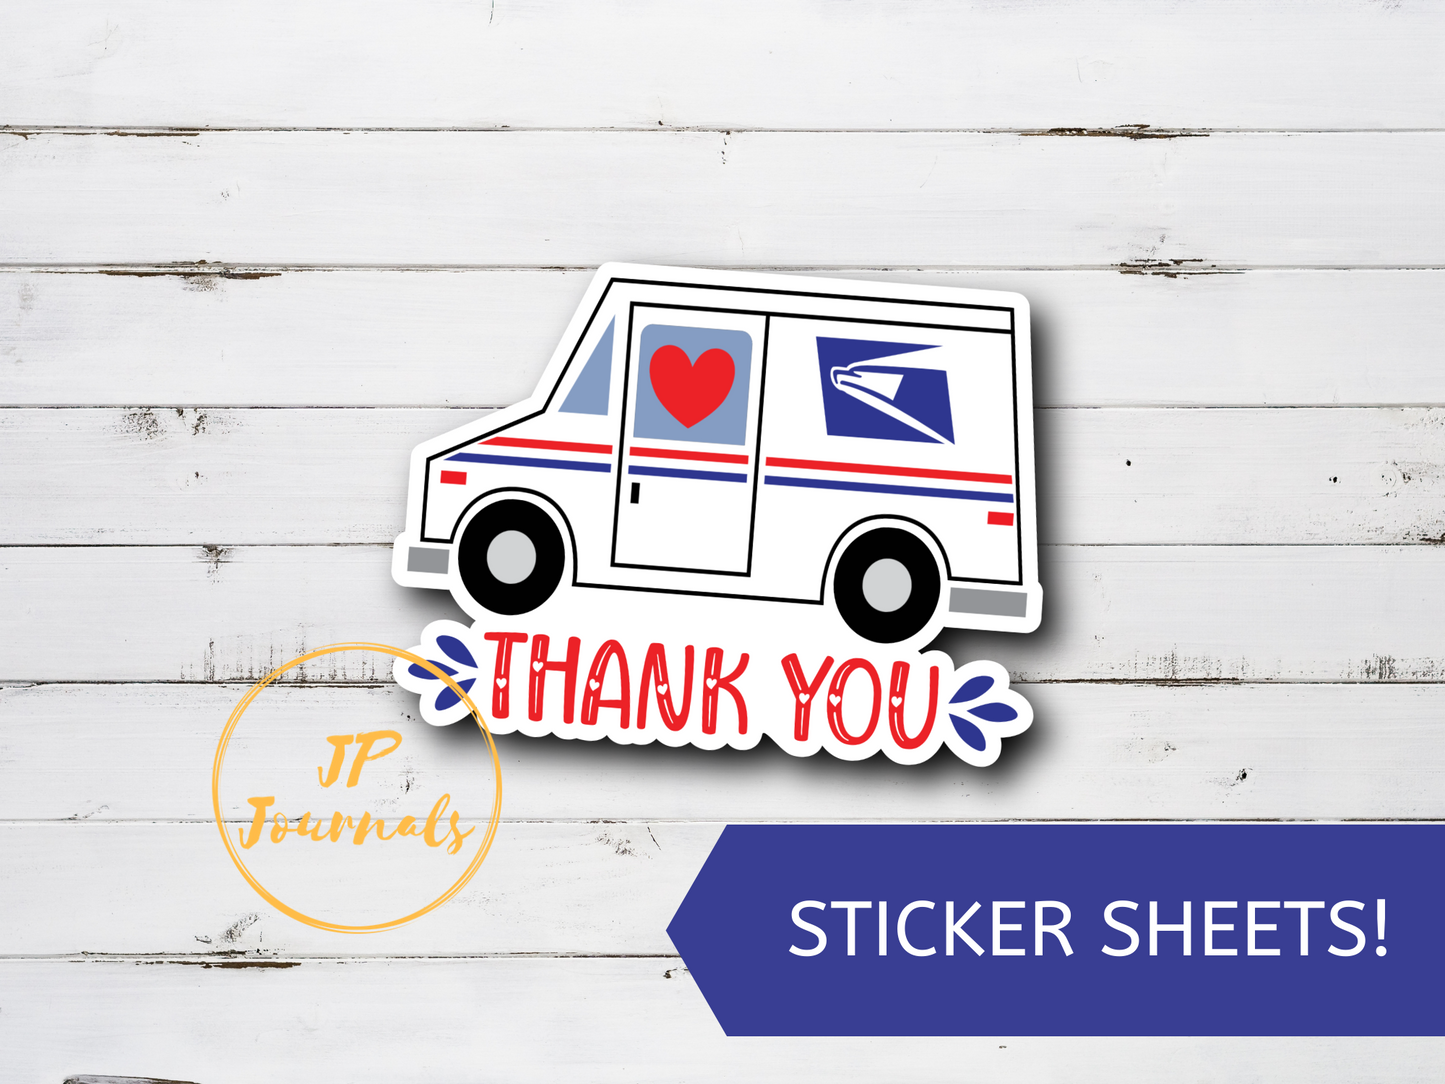 Thank You USPS Mail Truck Stickers, Thank You Mail Worker Postman Sticker Sheet, Small Business Packaging Supplies